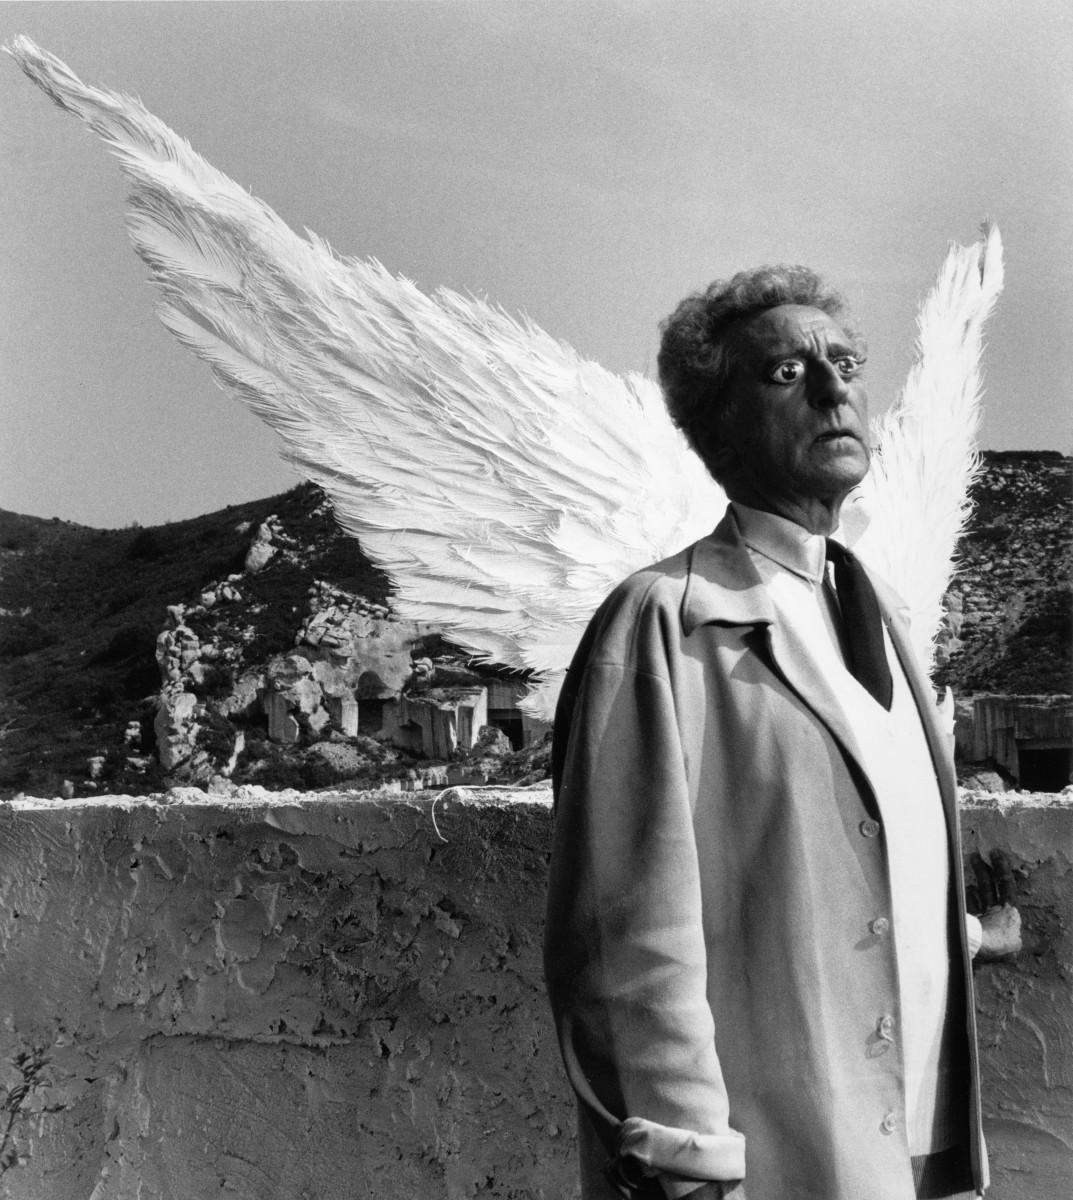 Lucien Clergue. Cocteau with the Wings of the Sphinx, Testament of Orpheus, 1959. Courtesy of the Atelier Lucien Clergue.